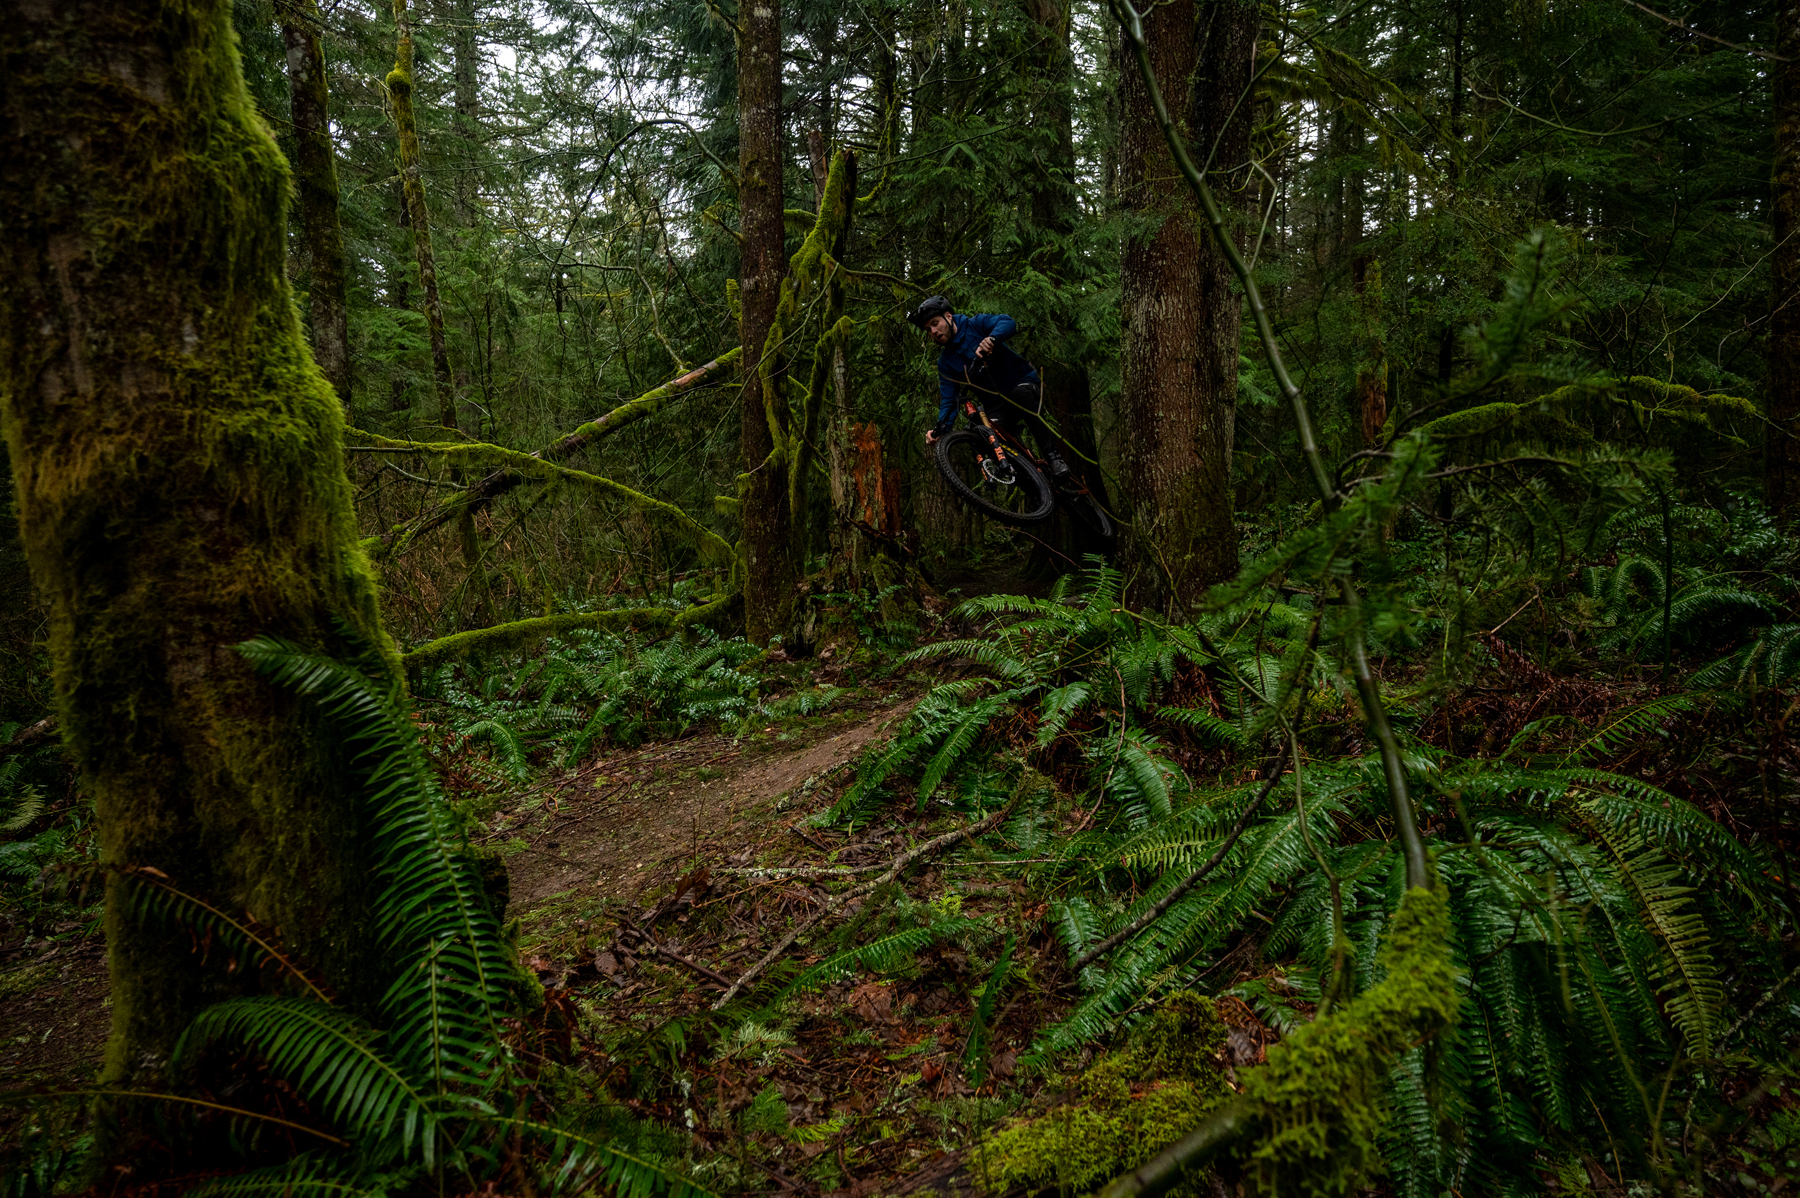 David Golay and Zack Henderson review the Orbea Rallon for Blister